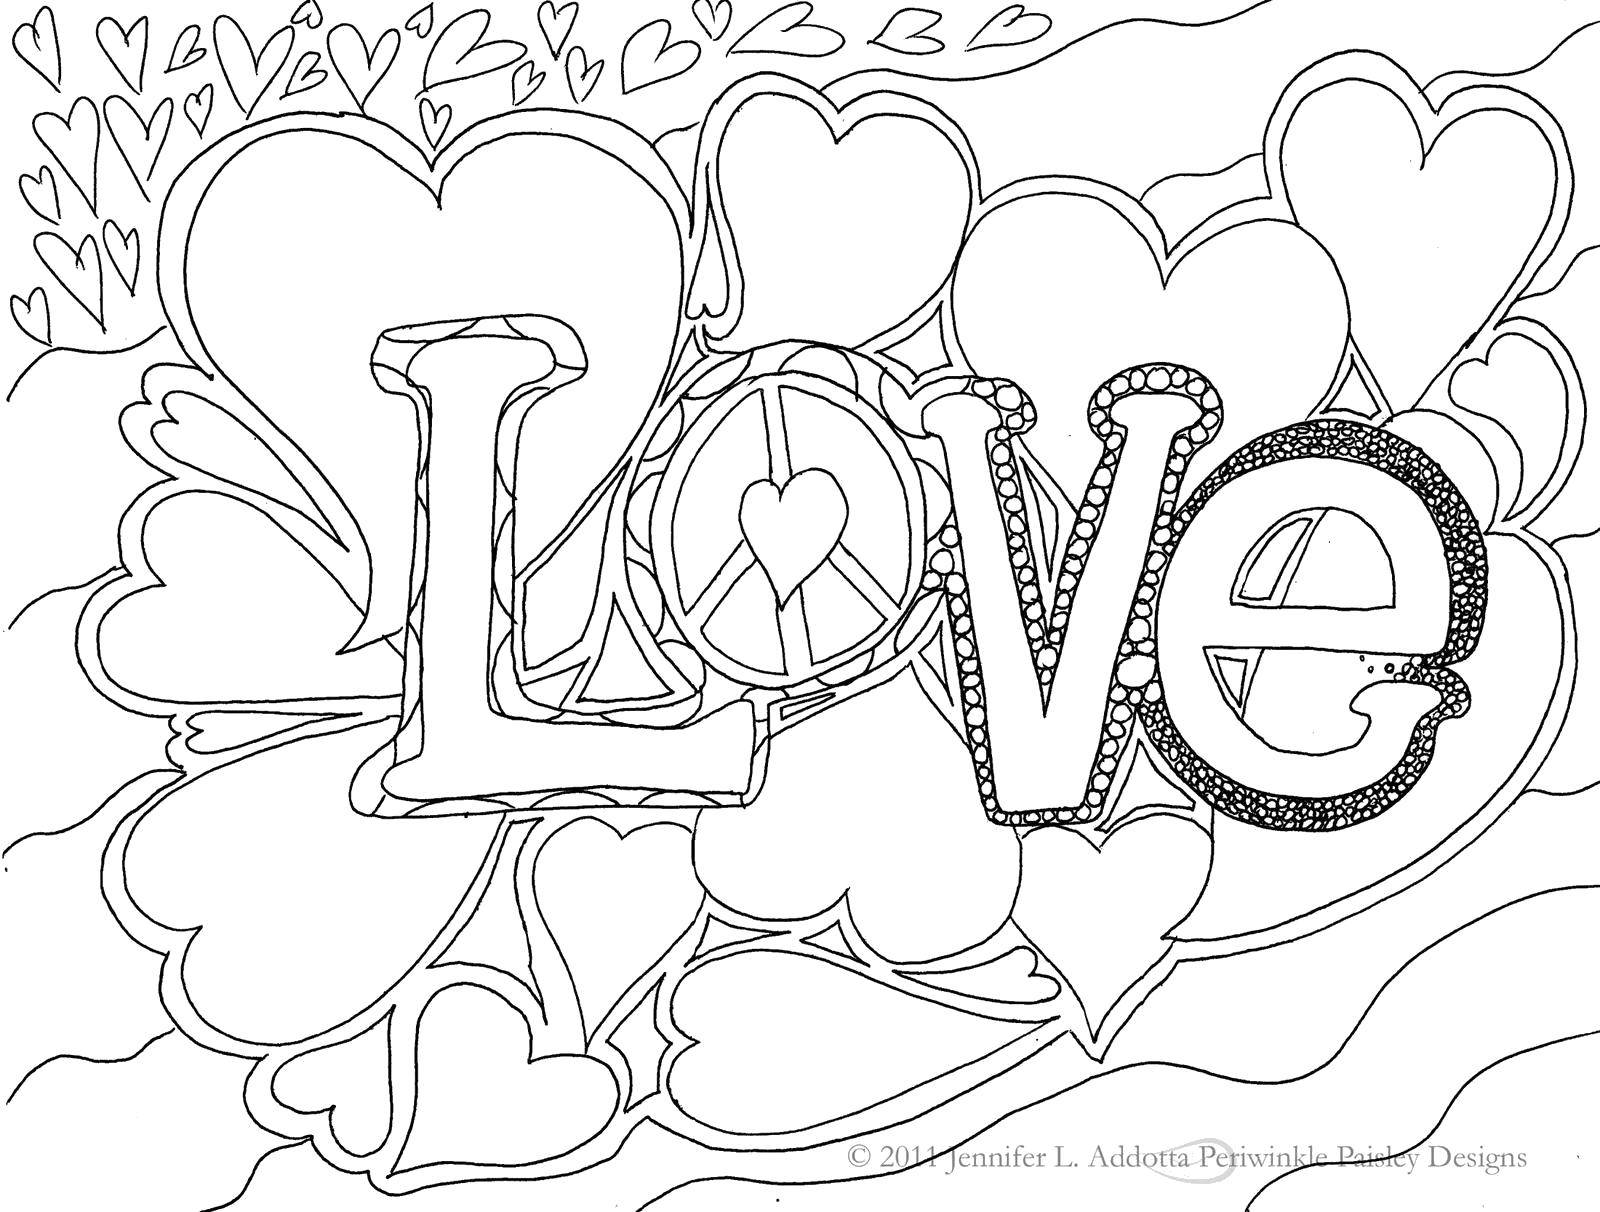 Coloring Patterned love. Category coloring antistress. Tags:  Bathroom with shower.